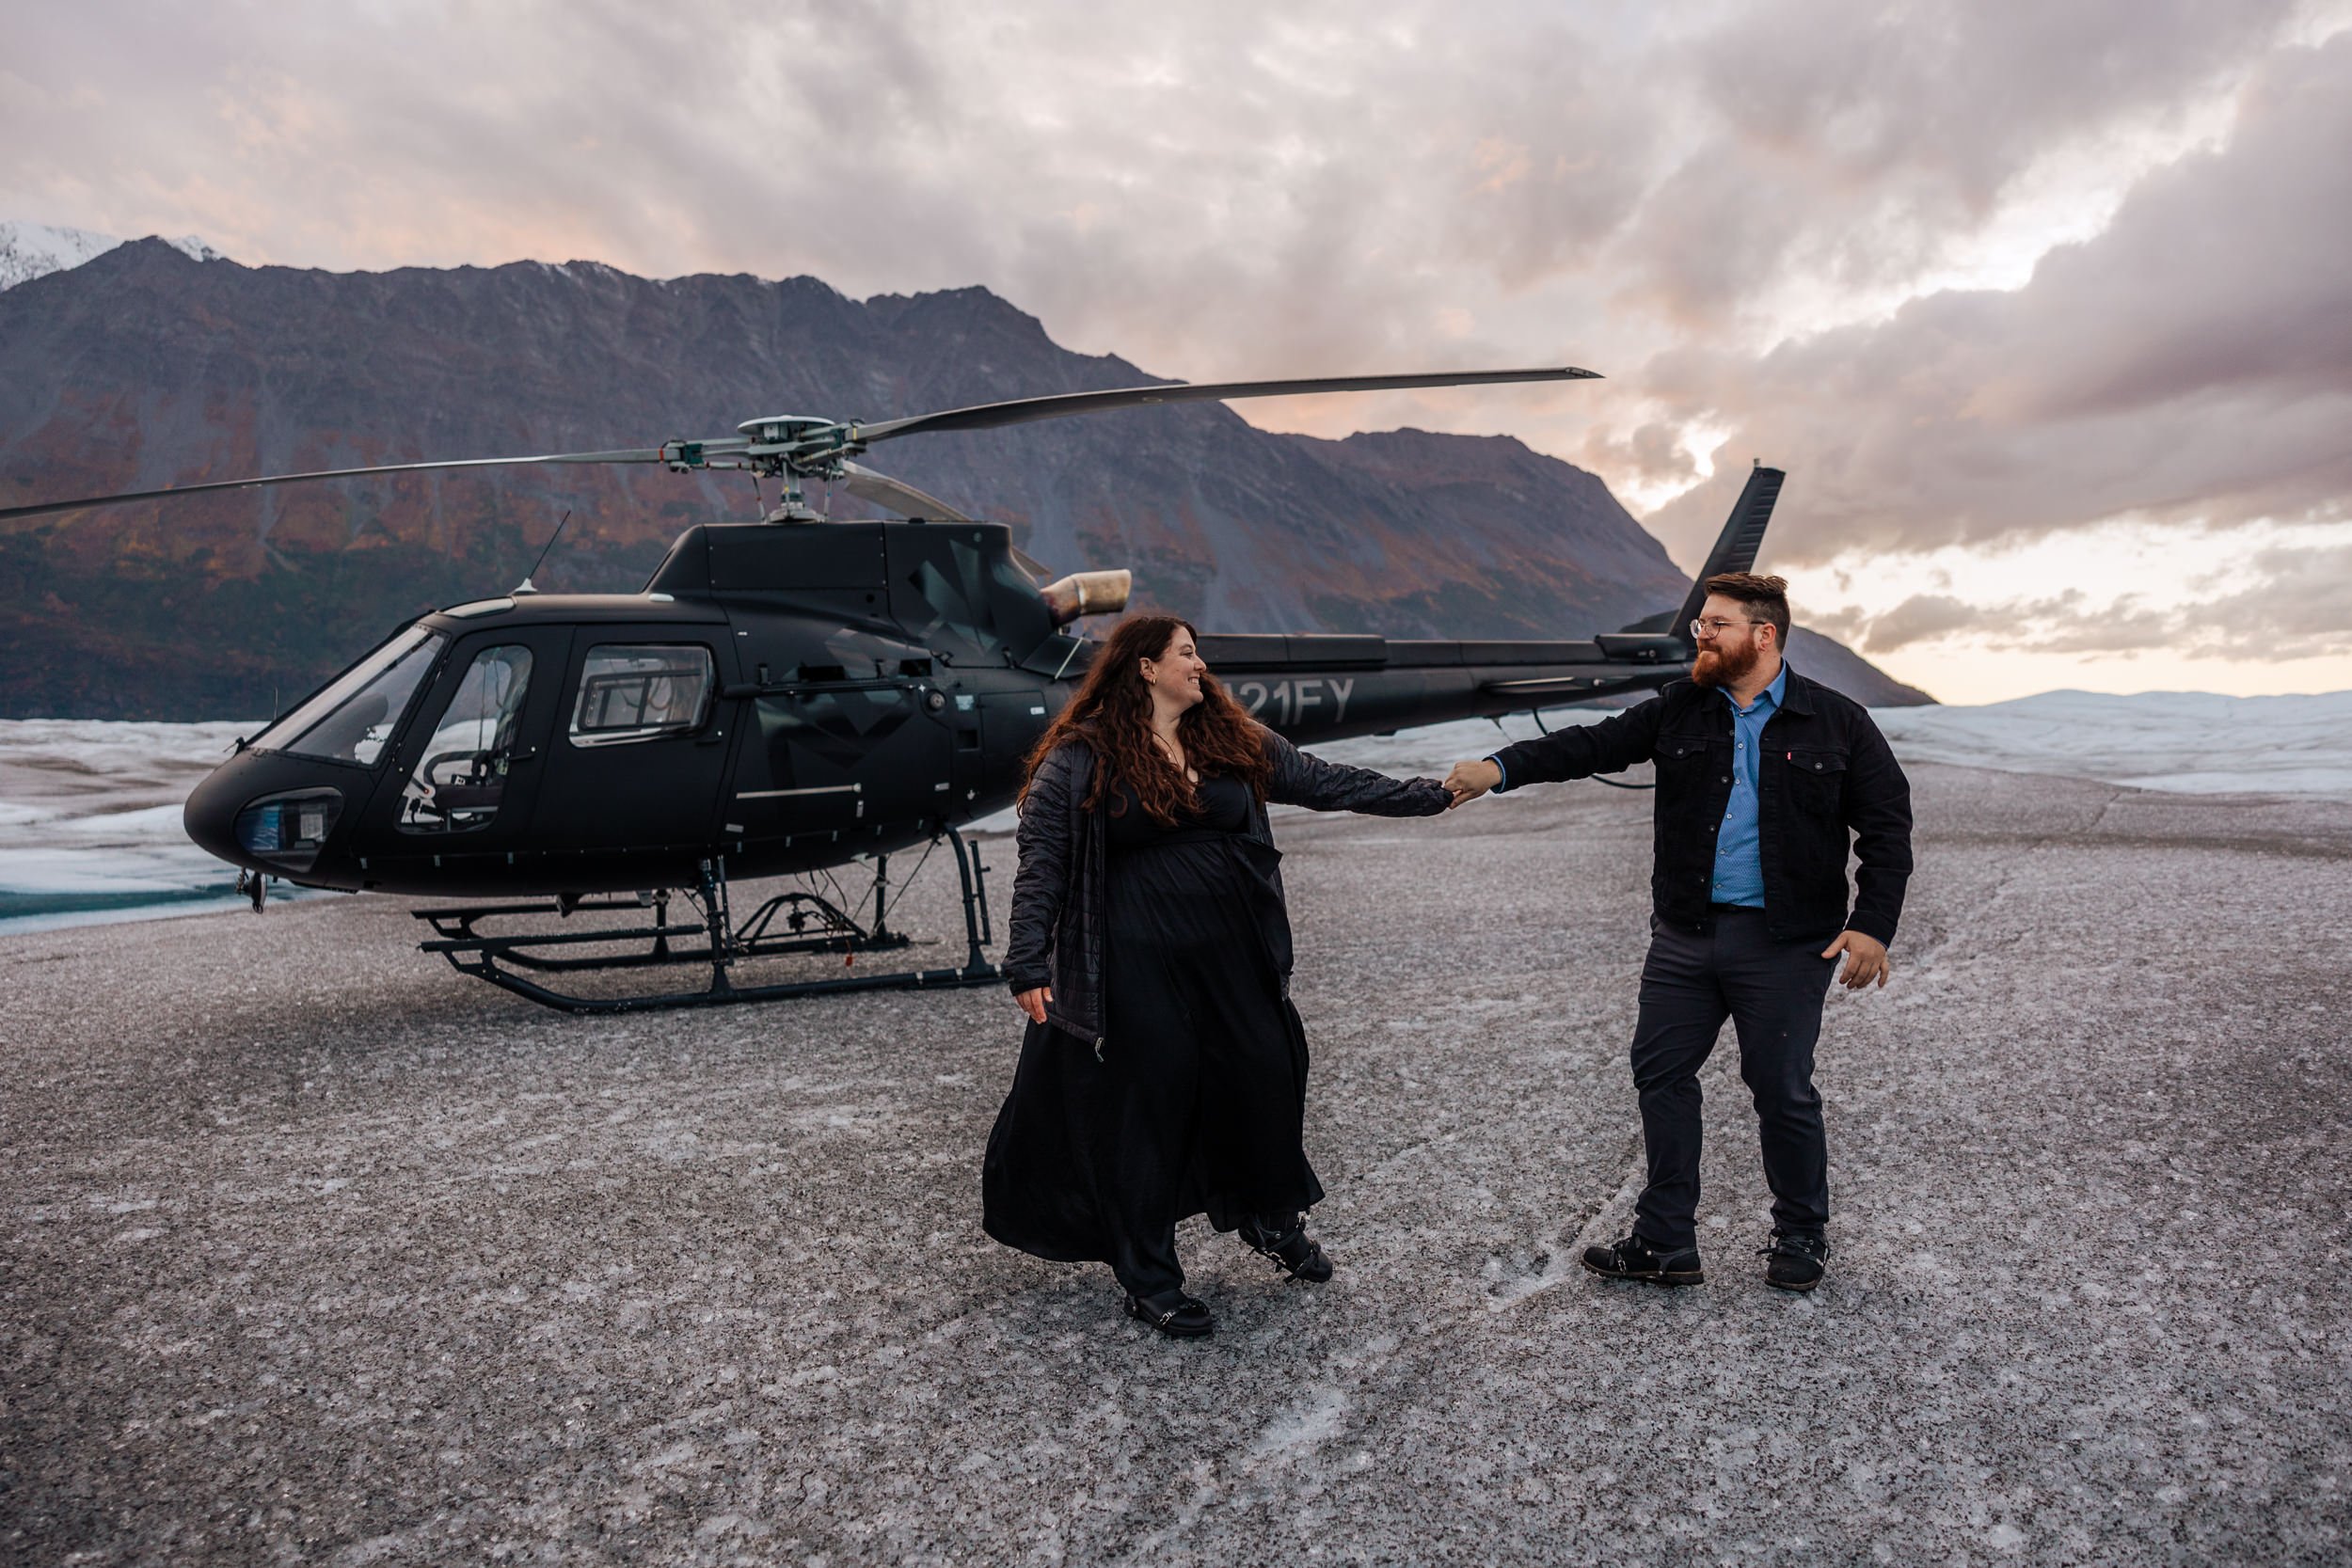 Hearnes-Elopement-Photography-Alaska-Helicopter-Engagement-Session-11.jpg